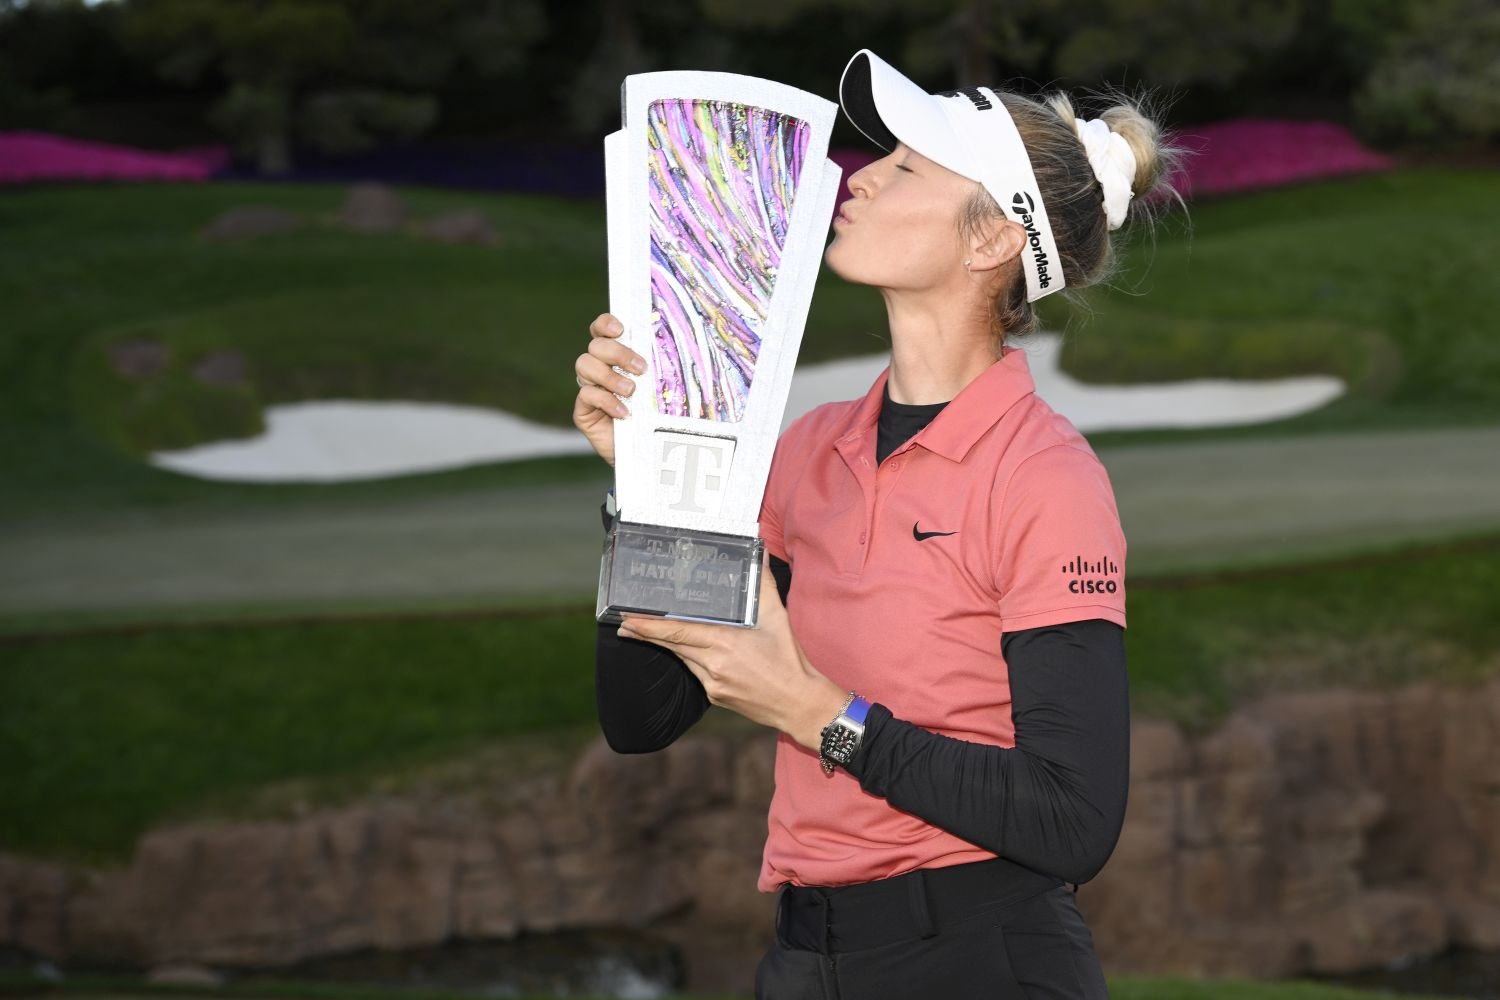 Nelly Korda (foto: GettyImages).